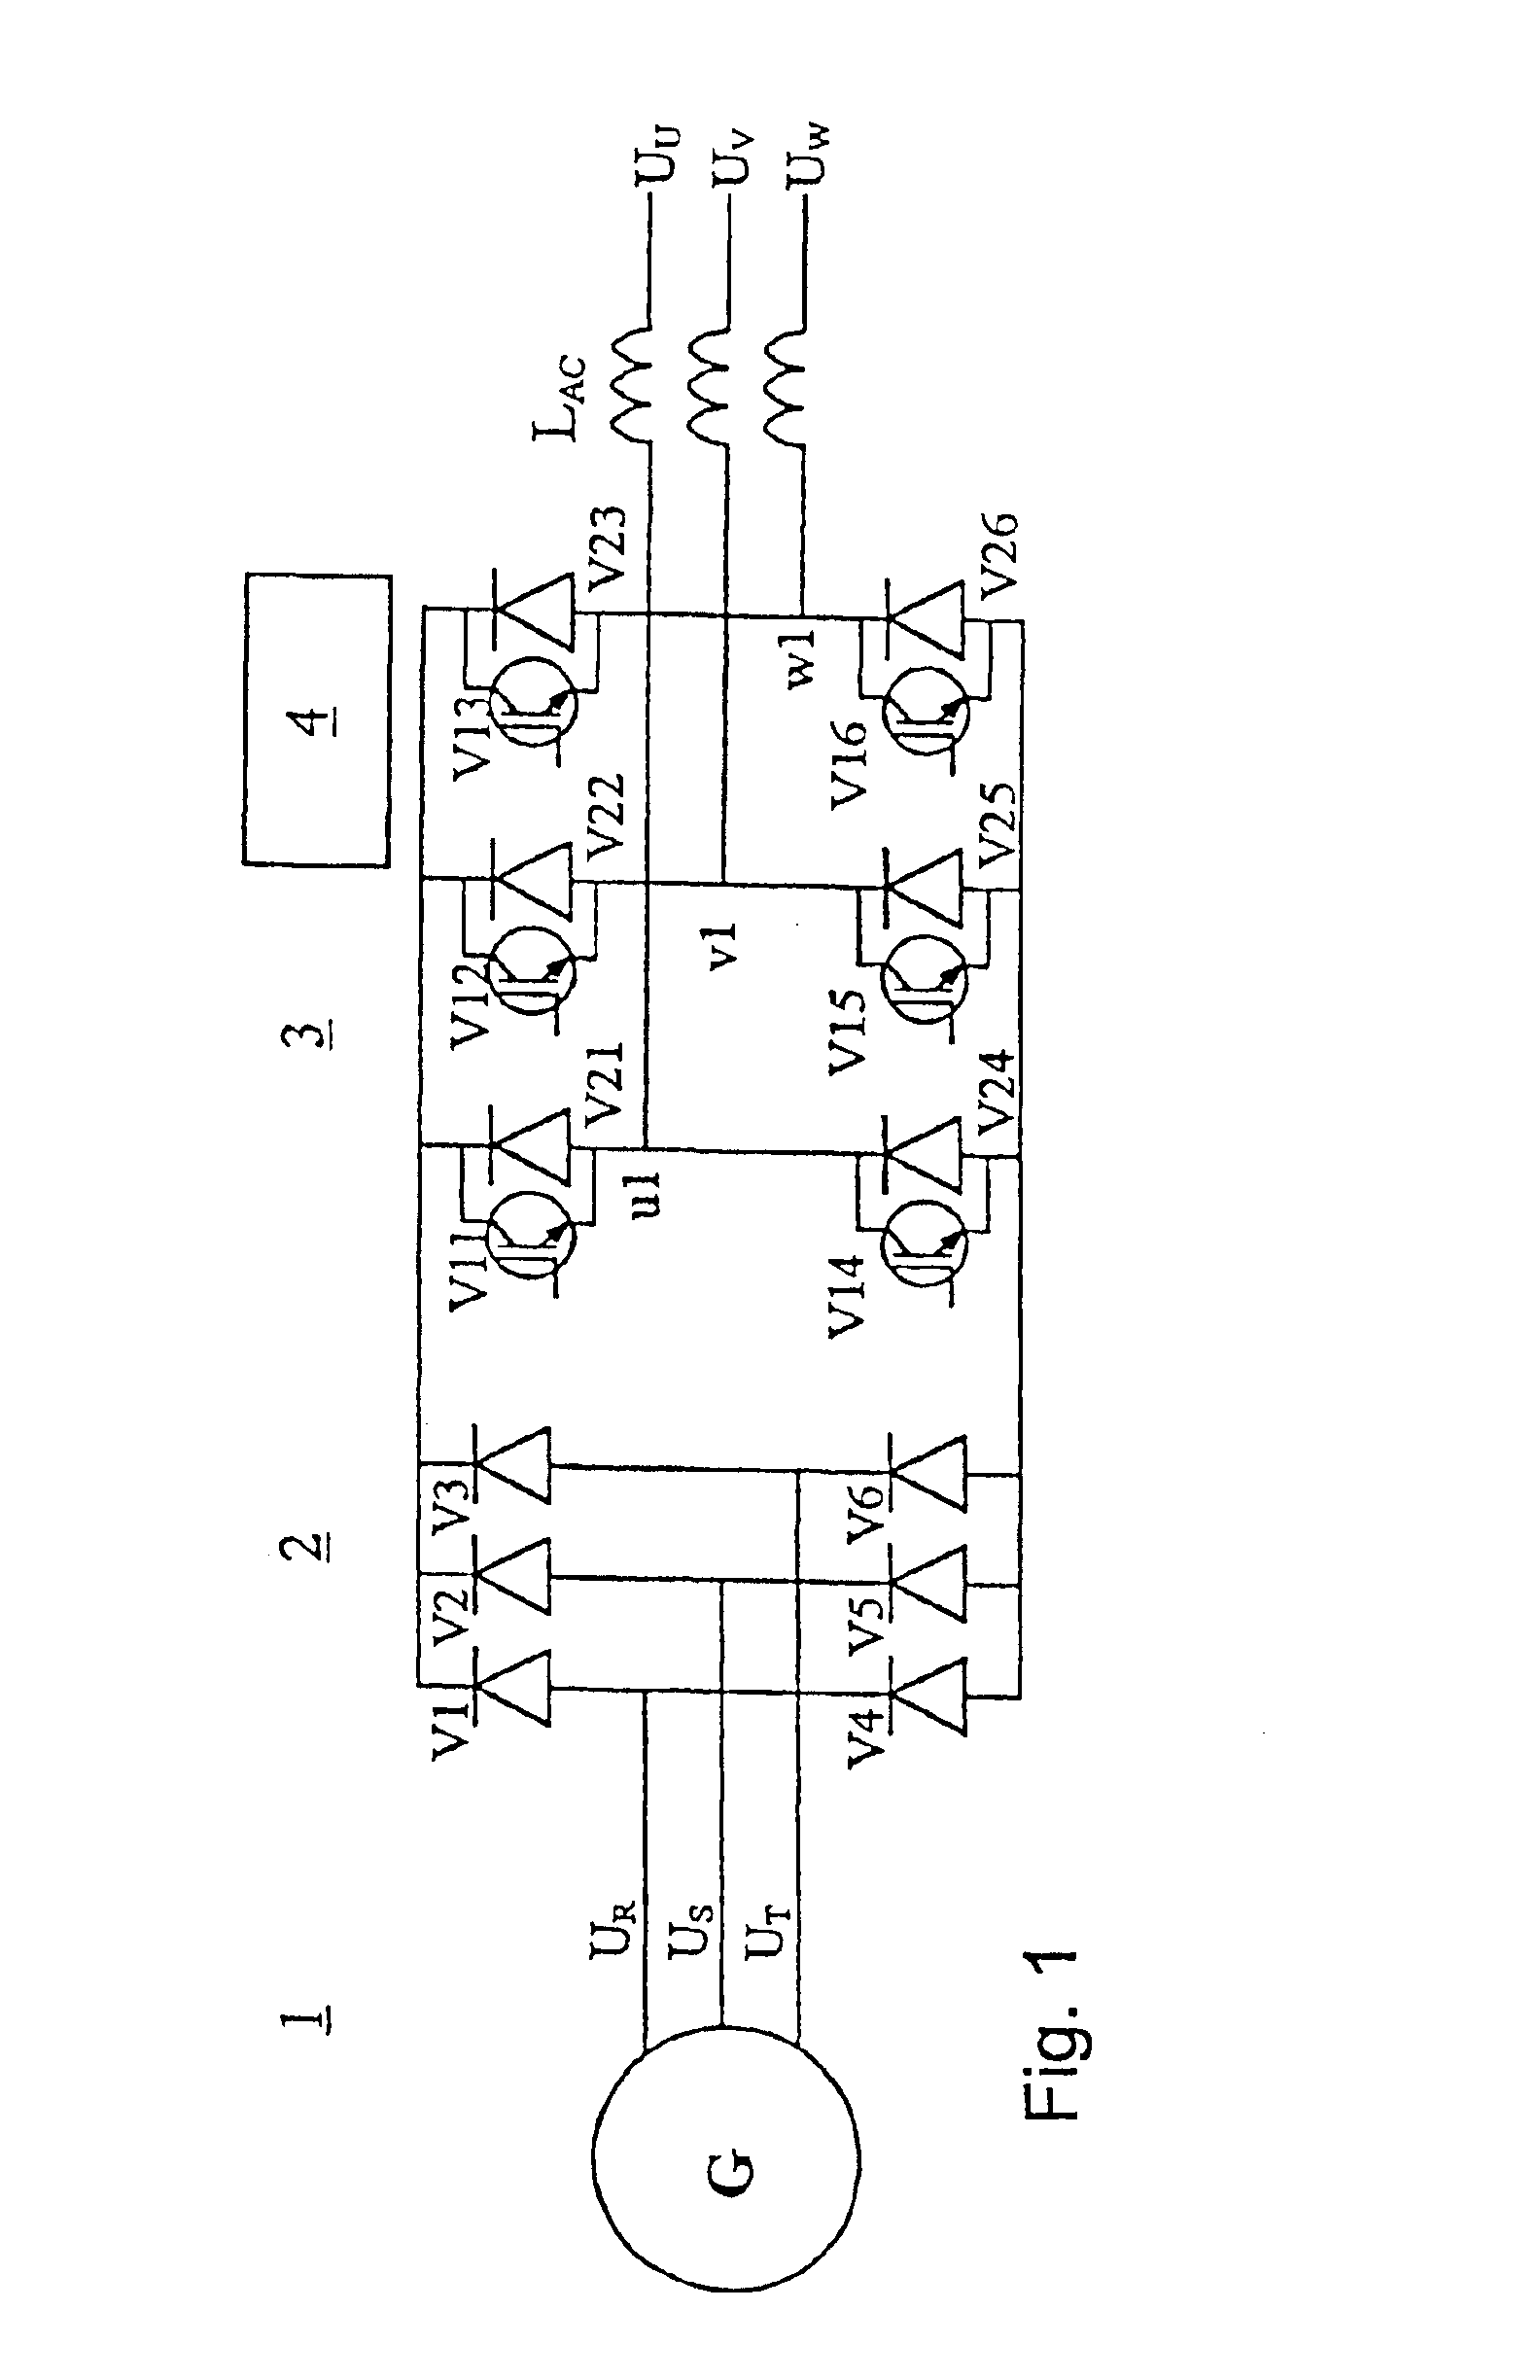 Apparatus for power transmission